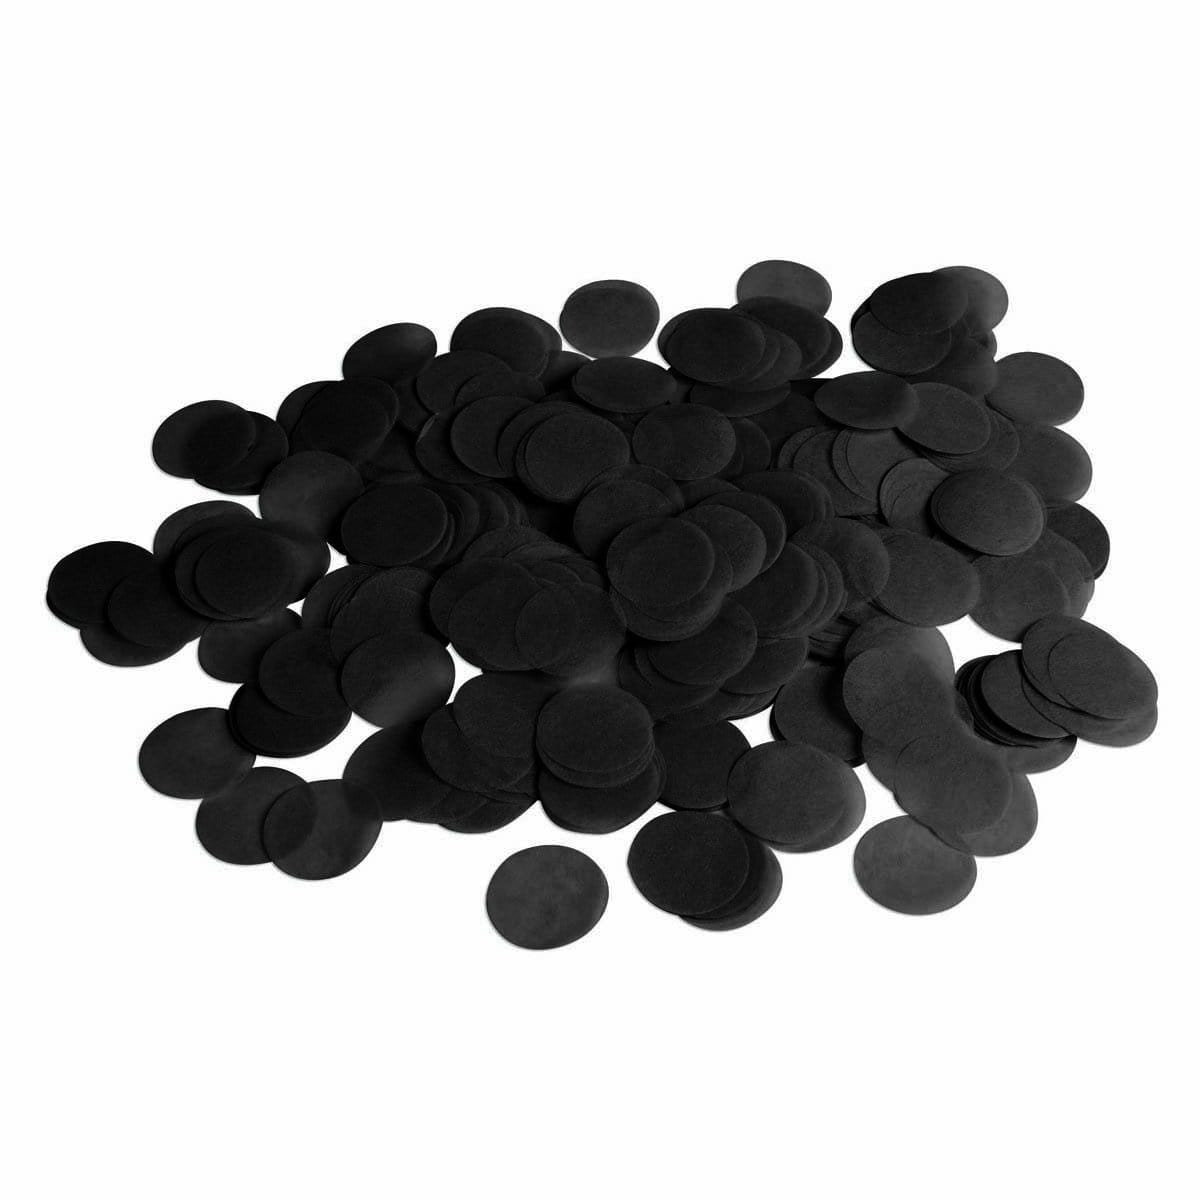 Buy Balloons Black Paper Confetti, 0.8 Ounce sold at Party Expert